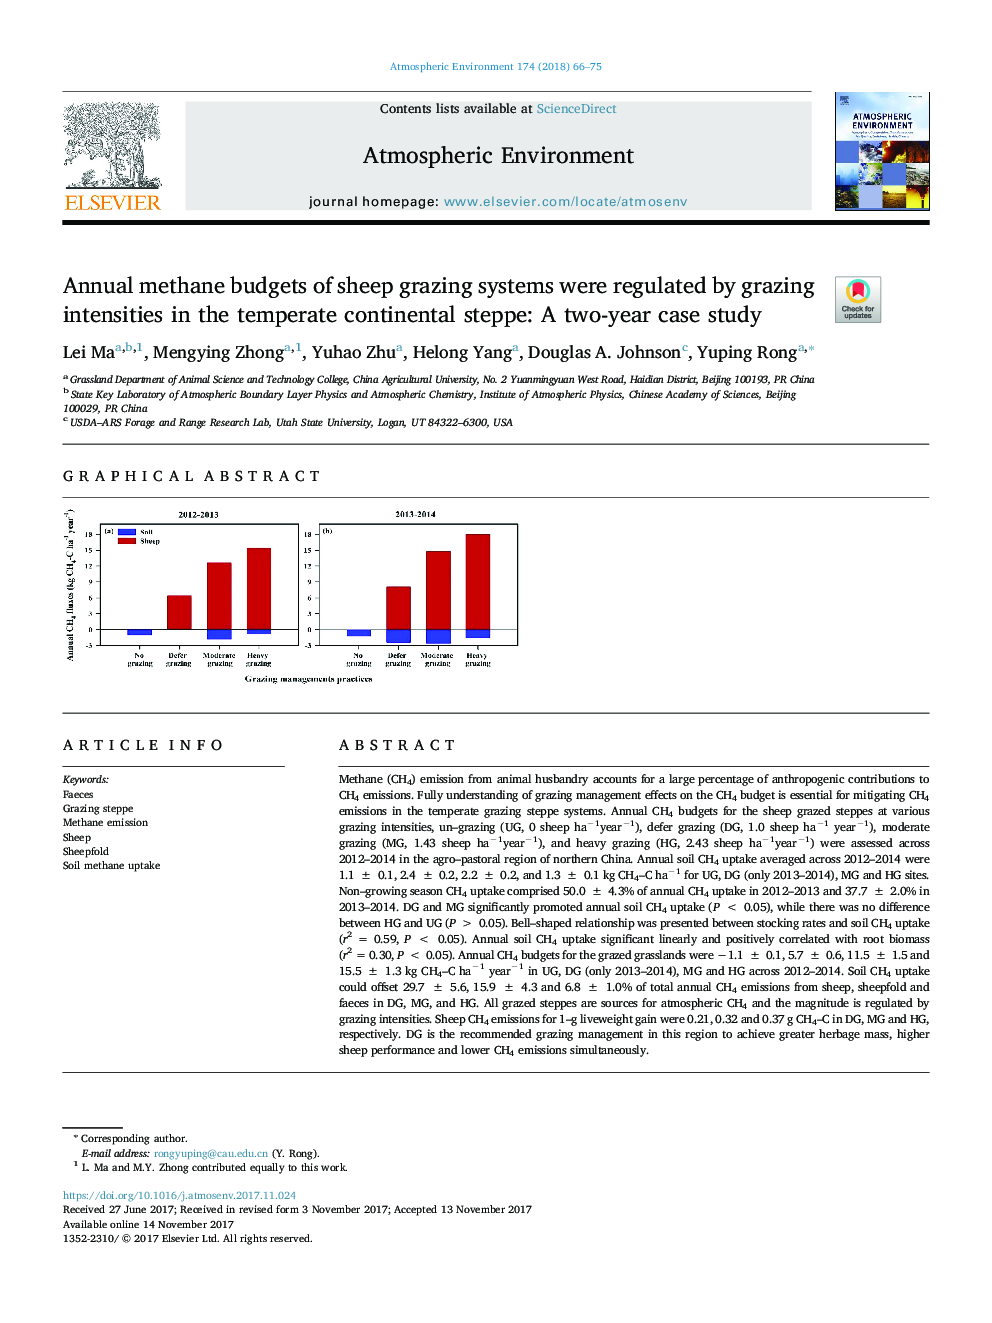 Annual methane budgets of sheep grazing systems were regulated by grazing intensities in the temperate continental steppe: A two-year case study